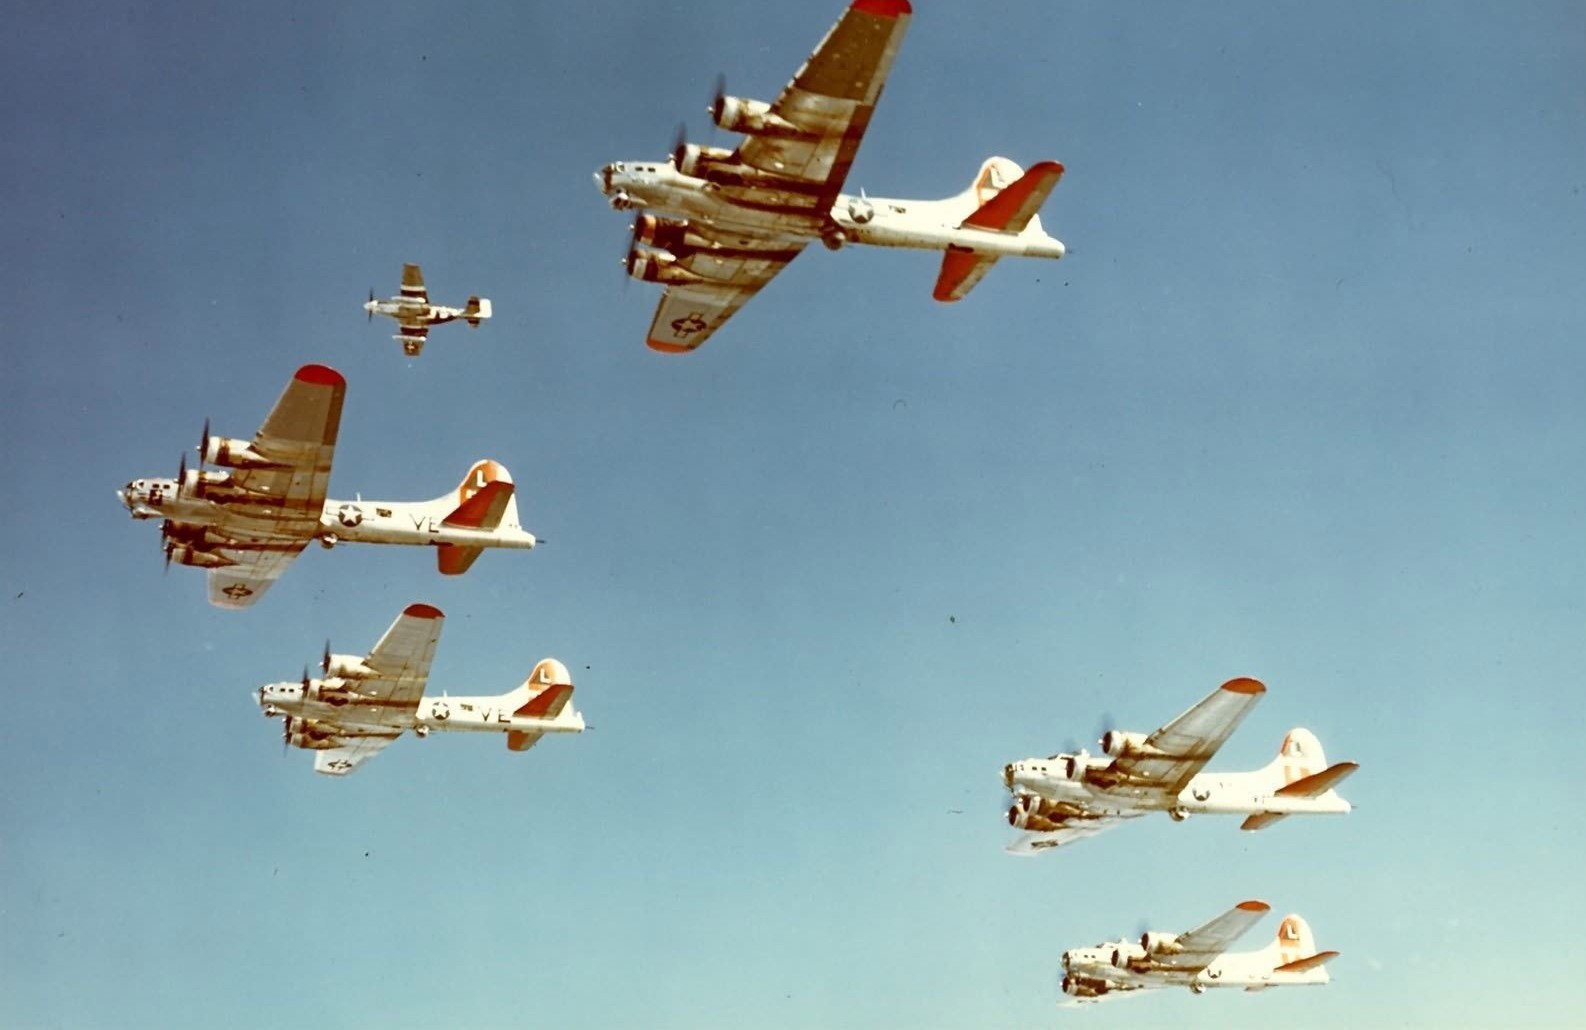 381st_Bomb_Group_B-17_formation_in_color_5~2.jpg